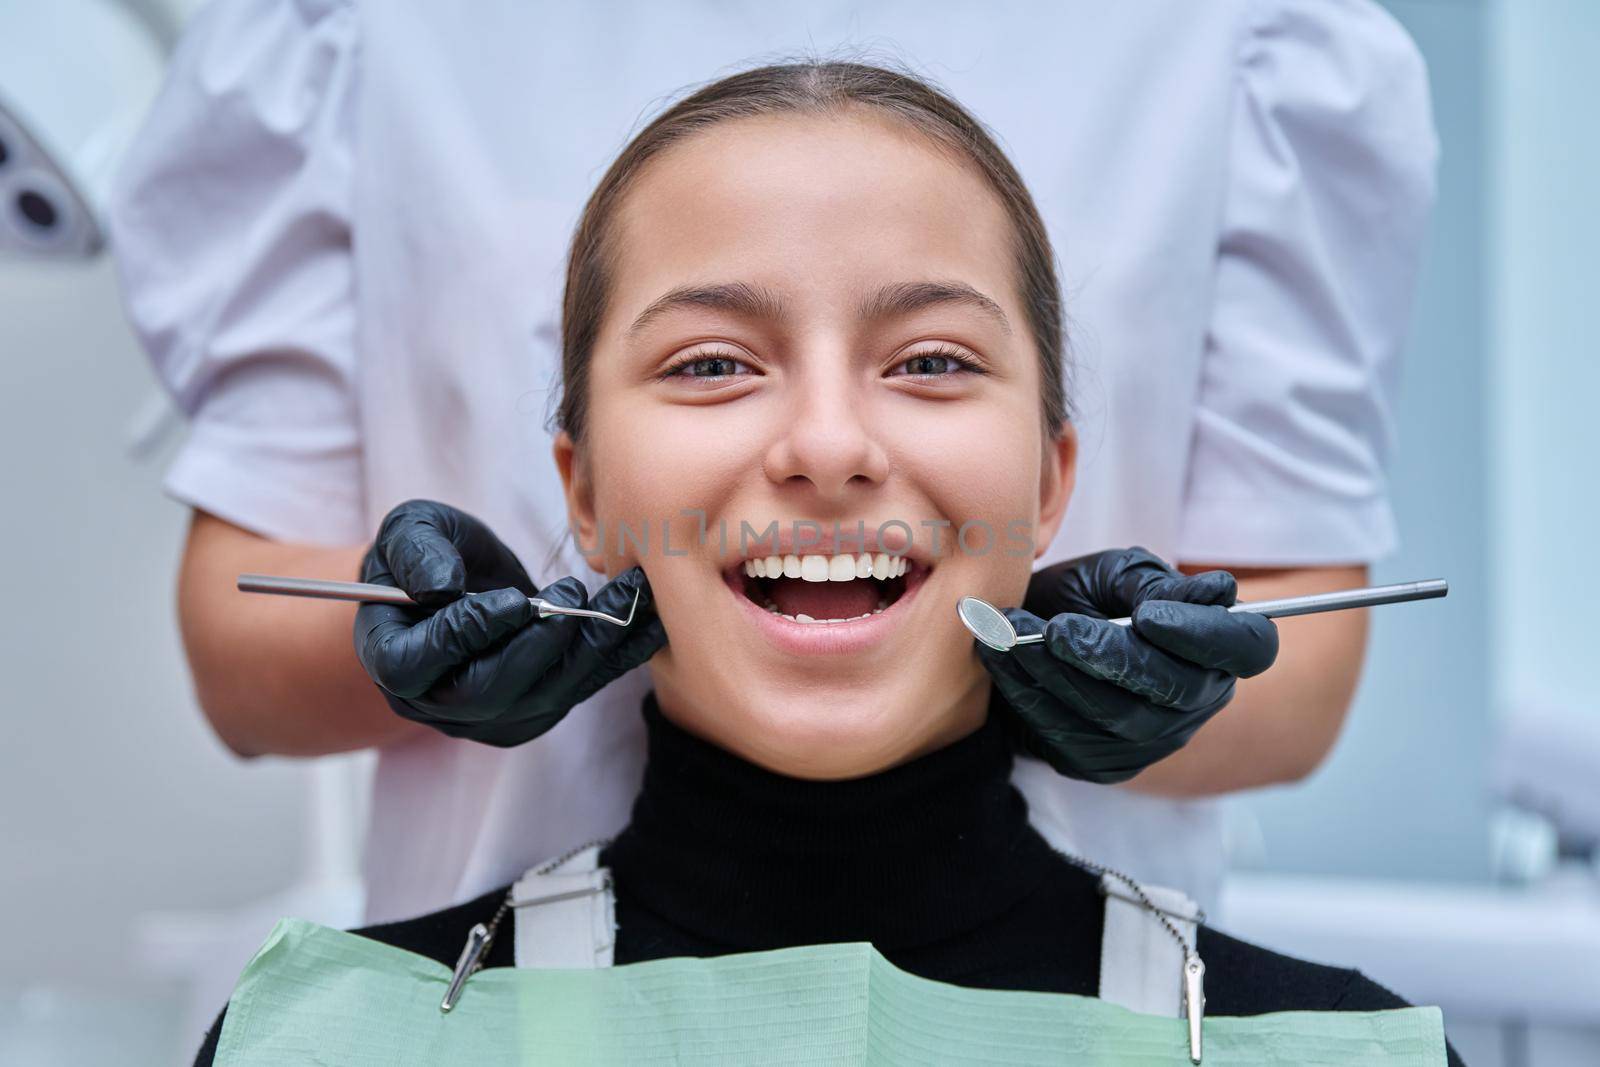 Portrait of young teenage girl in dental chair with hands of doctor with tools. Female teenager smiling with teeth looking at camera in dentist office. Adolescence hygiene treatment dental health care